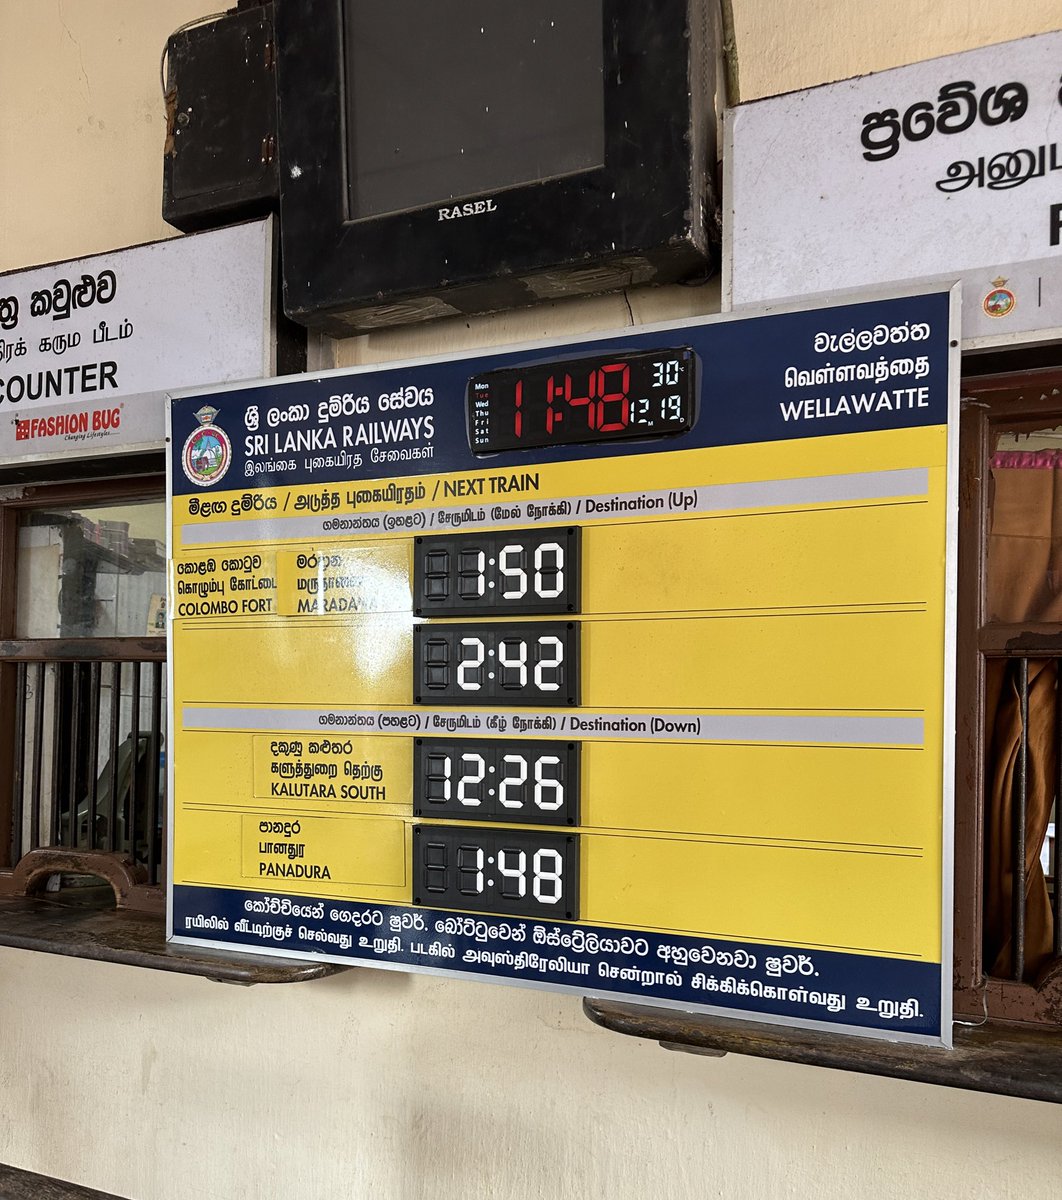 the Australian government sponsoring railway signage in Colombo: ‘The train will surely get you home. Getting to Australia by boat will surely get you caught.’ In Sinhala/Tamil only in an otherwise trilingual sign.